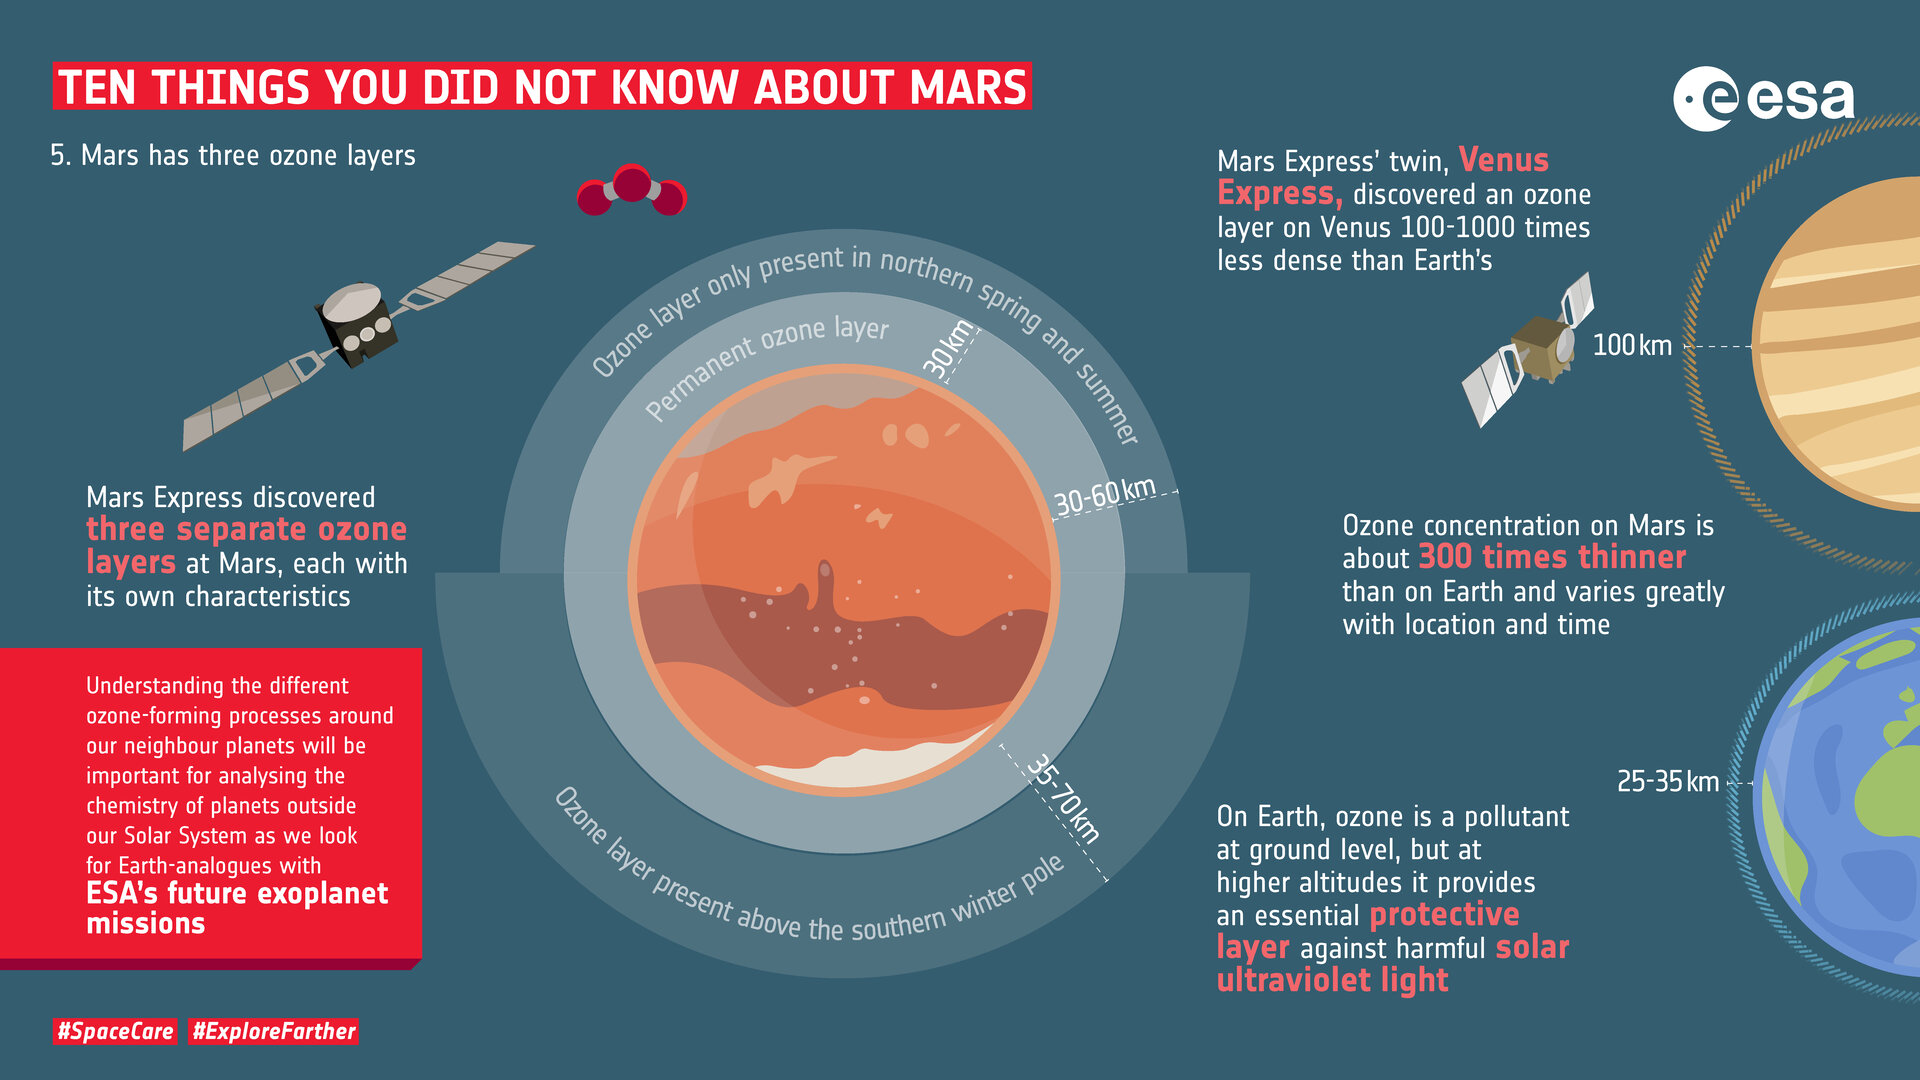 Ten things you did not know about Mars: 5. Ozone 